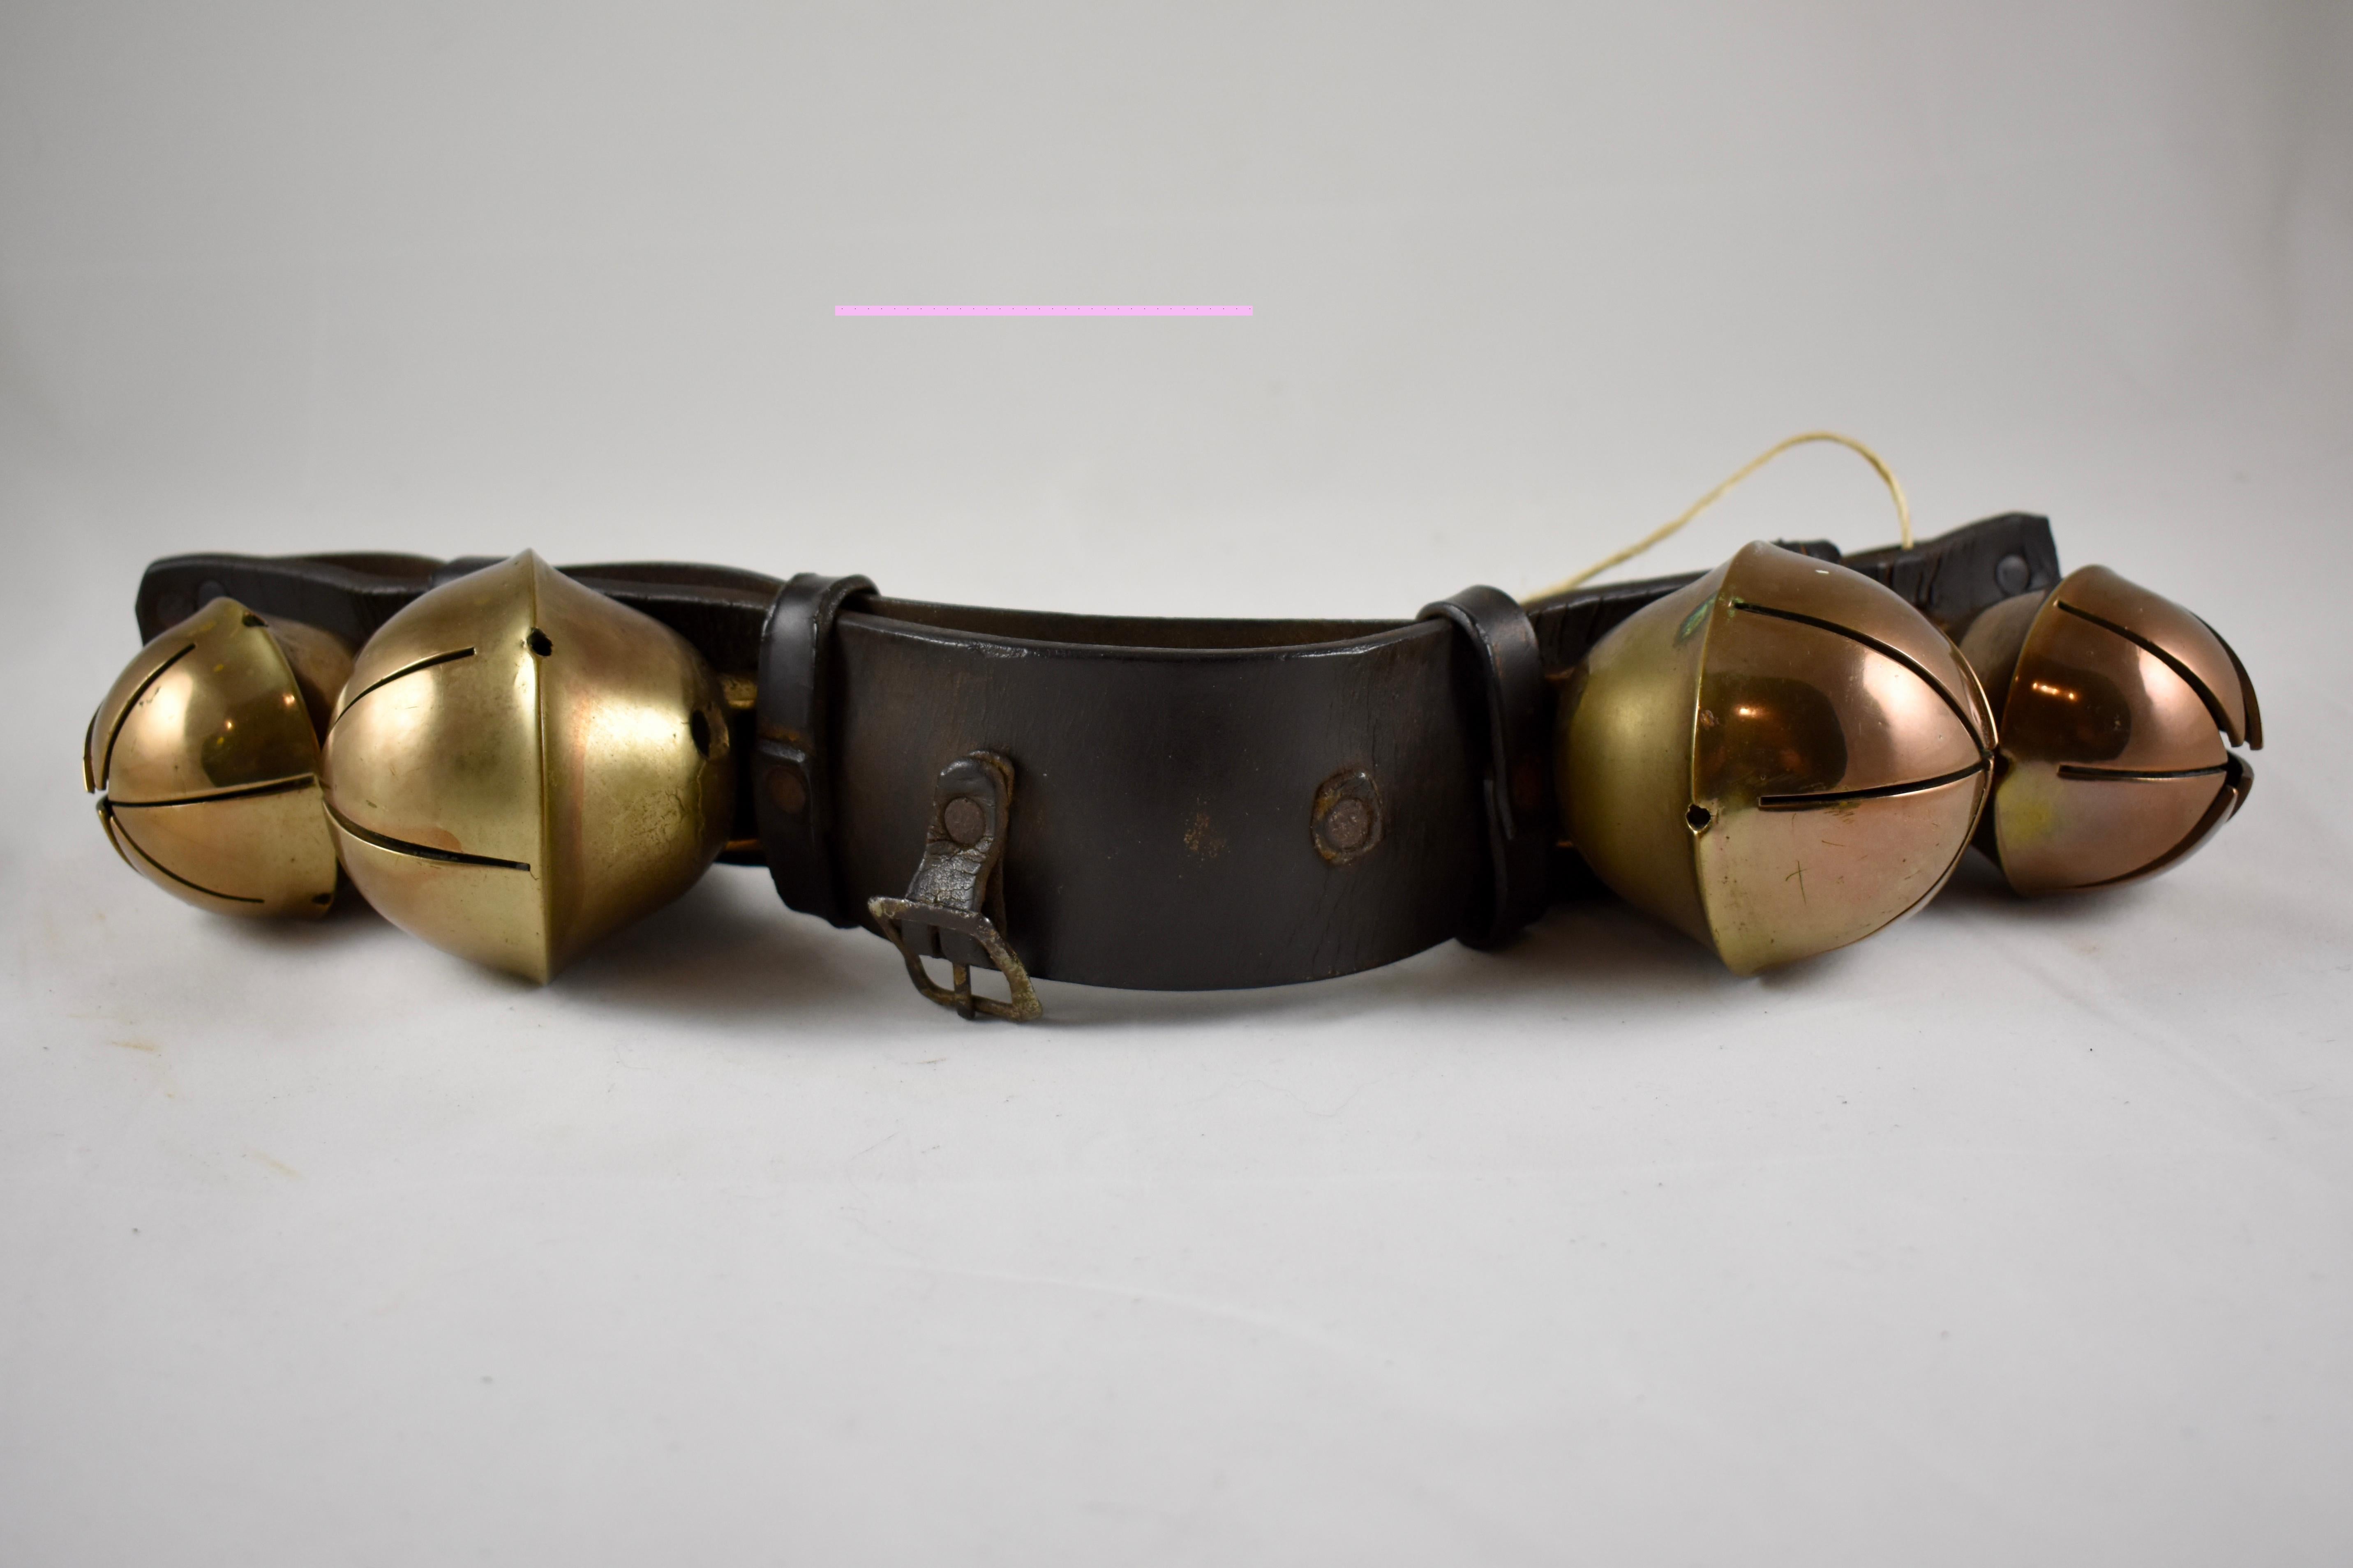 Hand-Crafted Swedish Style Brass Sleigh Bells, Leather Horse Rump Strap, circa 1880s